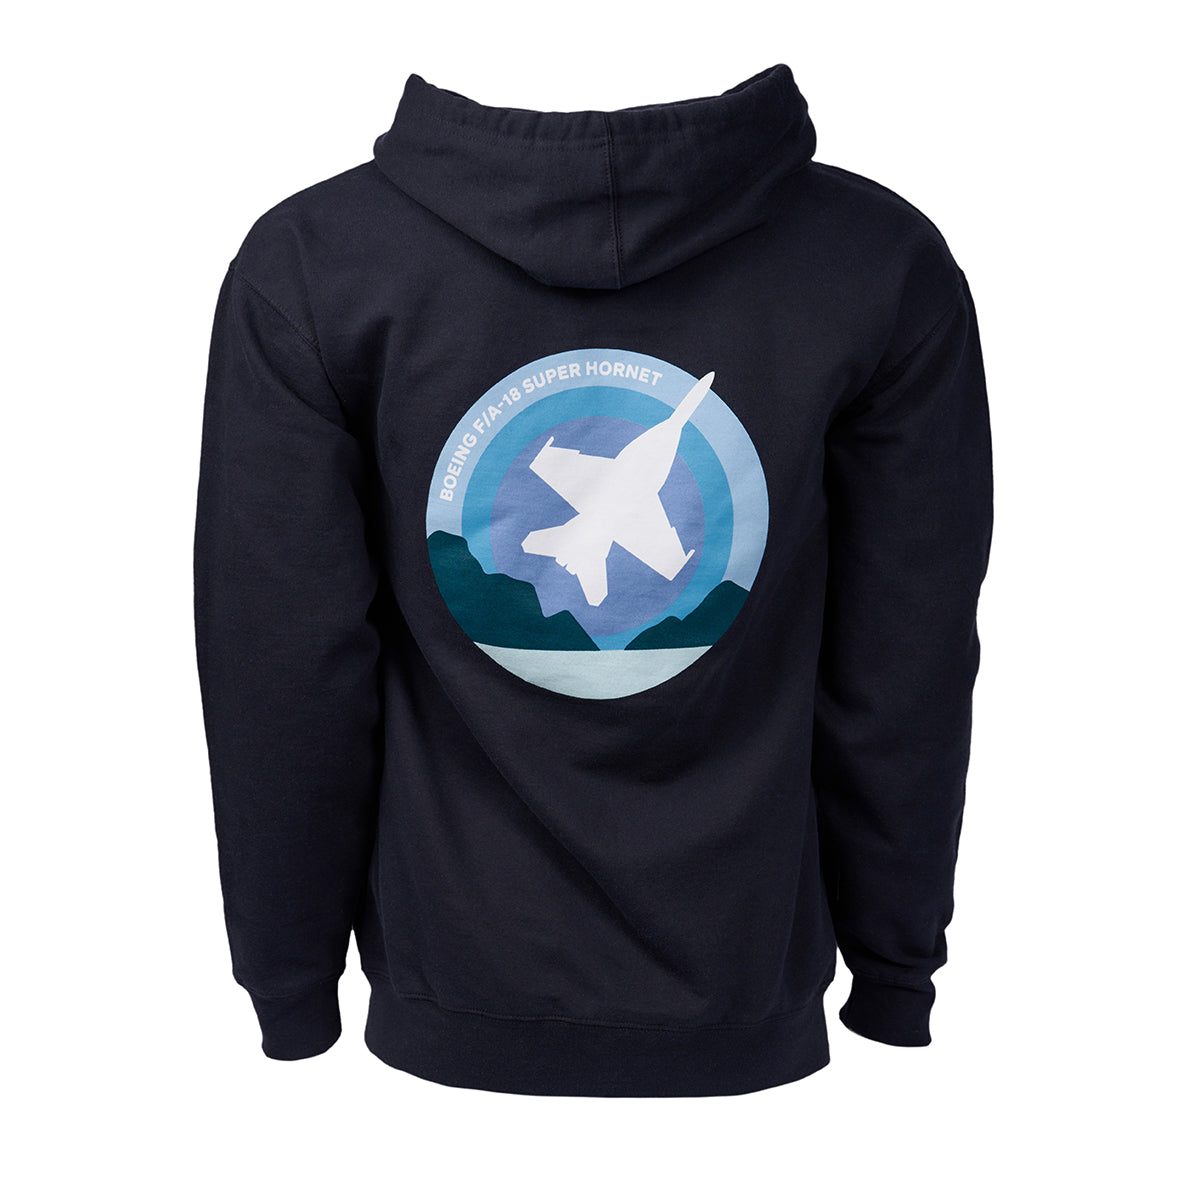 Full product image of the back side of the hooded sweatshirt in a navy blue color.  Showing the Skyward graphic of the Boeing F/A-18 Super Hornet.